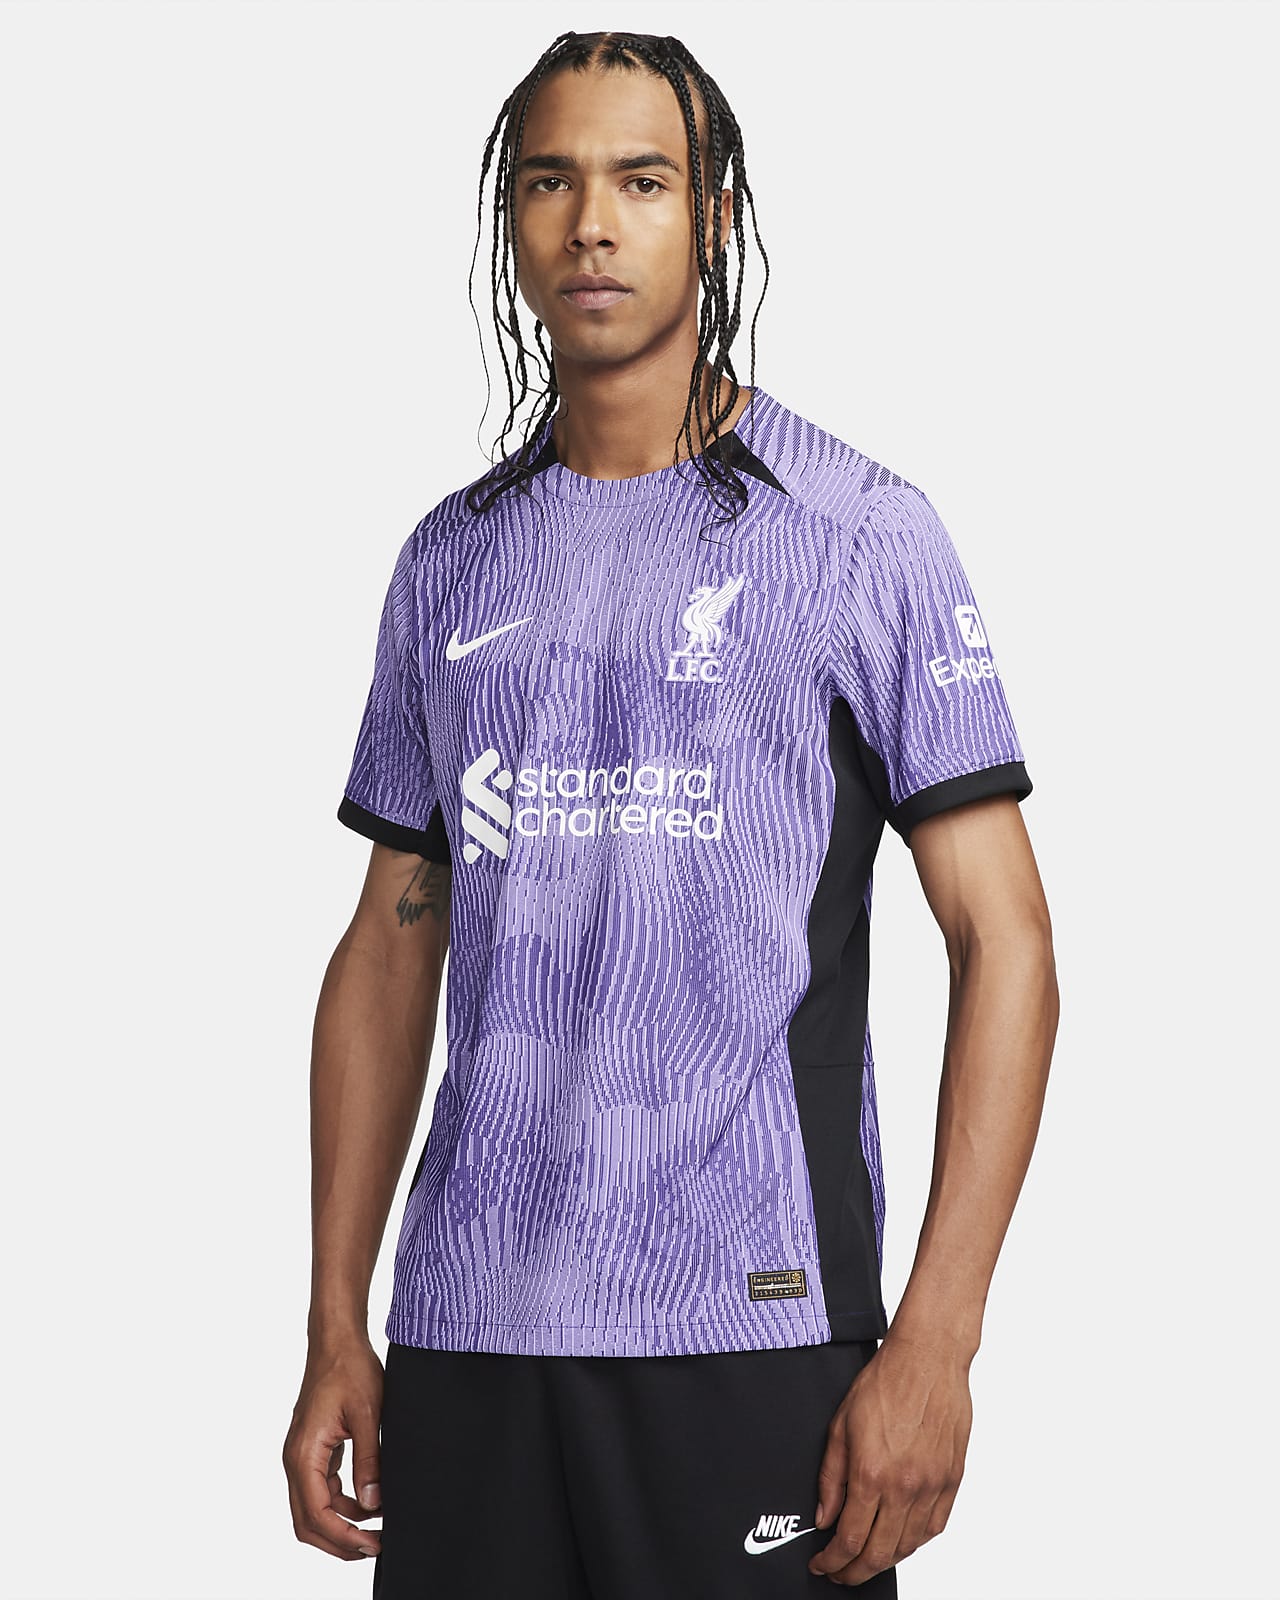 Soccer.com - The new Pitch Black Liverpool FC jersey